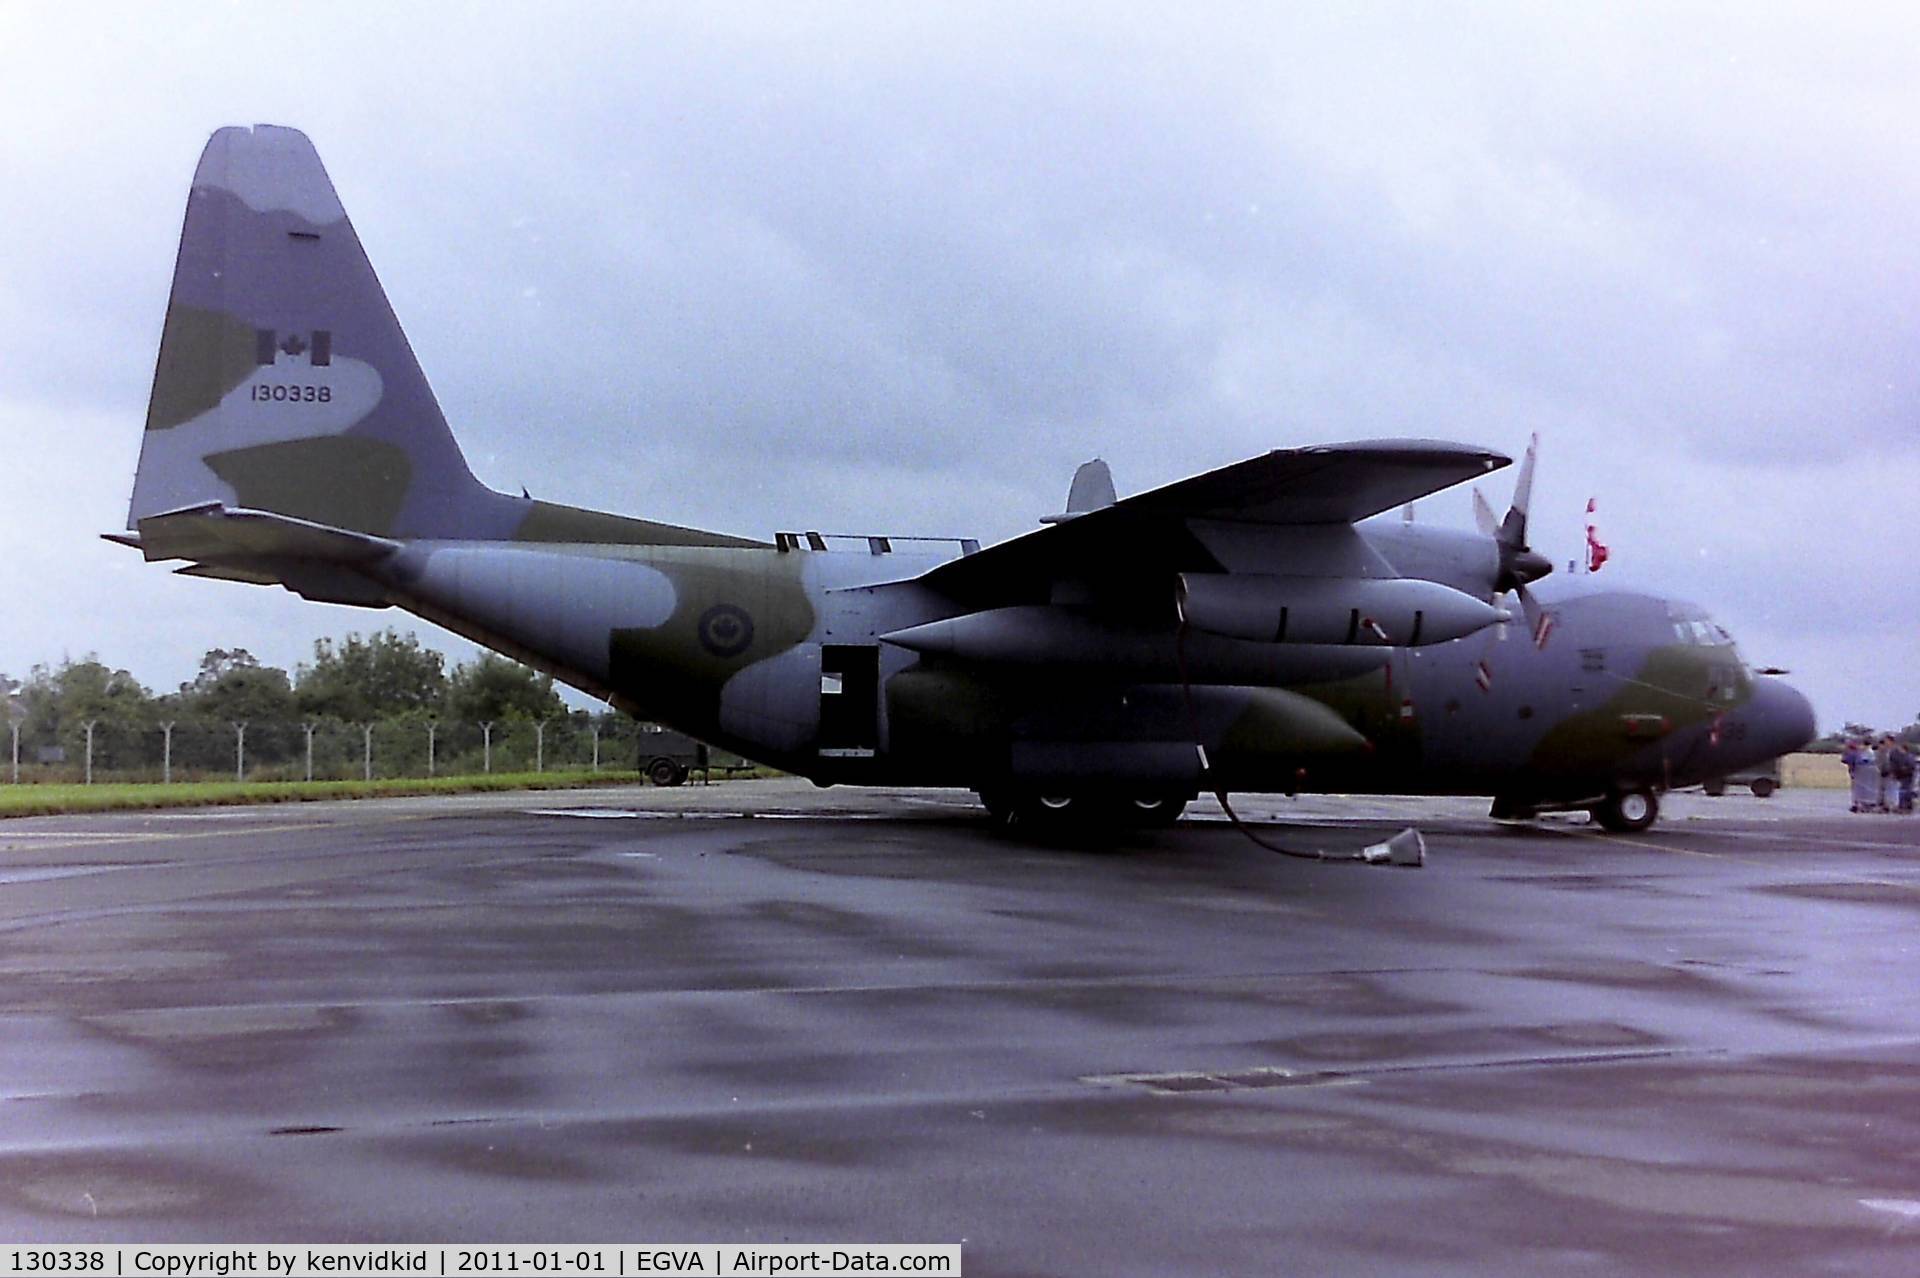 130338, 1989 Lockheed KCC-130H Hercules C/N 382-5175, At RIAT 1993, scanned from negative.